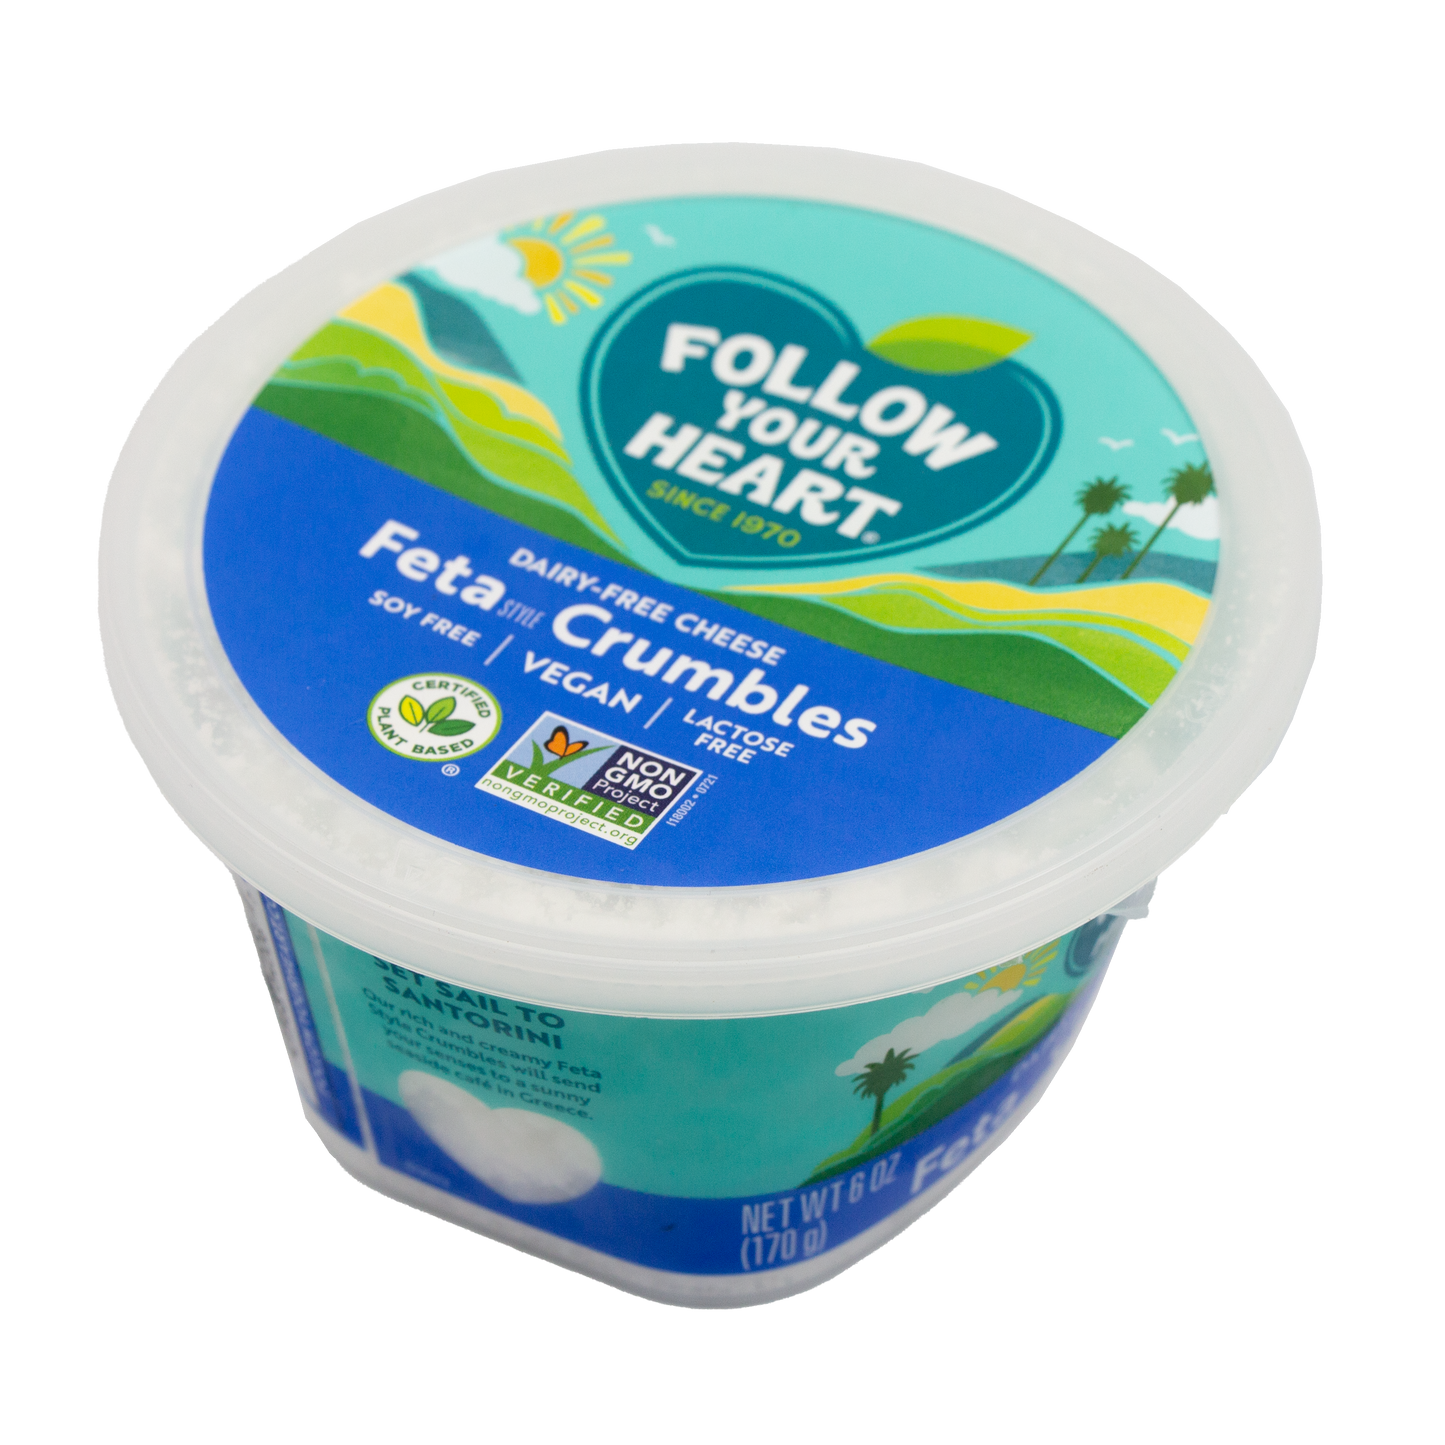 Follow Your Heart - Feta Cheese Crumbles (Store Pick-Up Only)